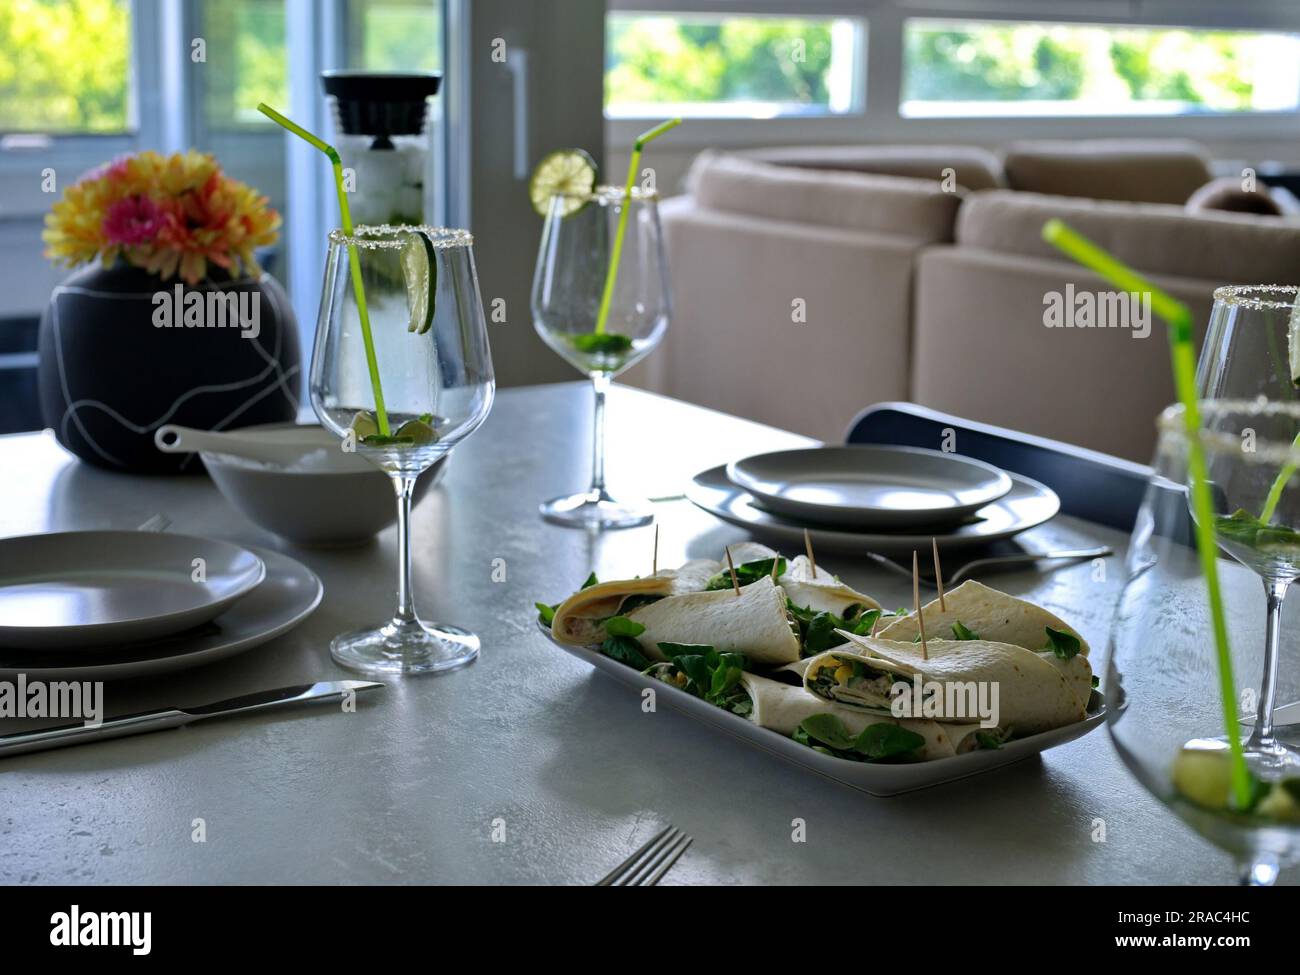 Plate with tortilla and glasses for cocktail on a table at home Stock Photo